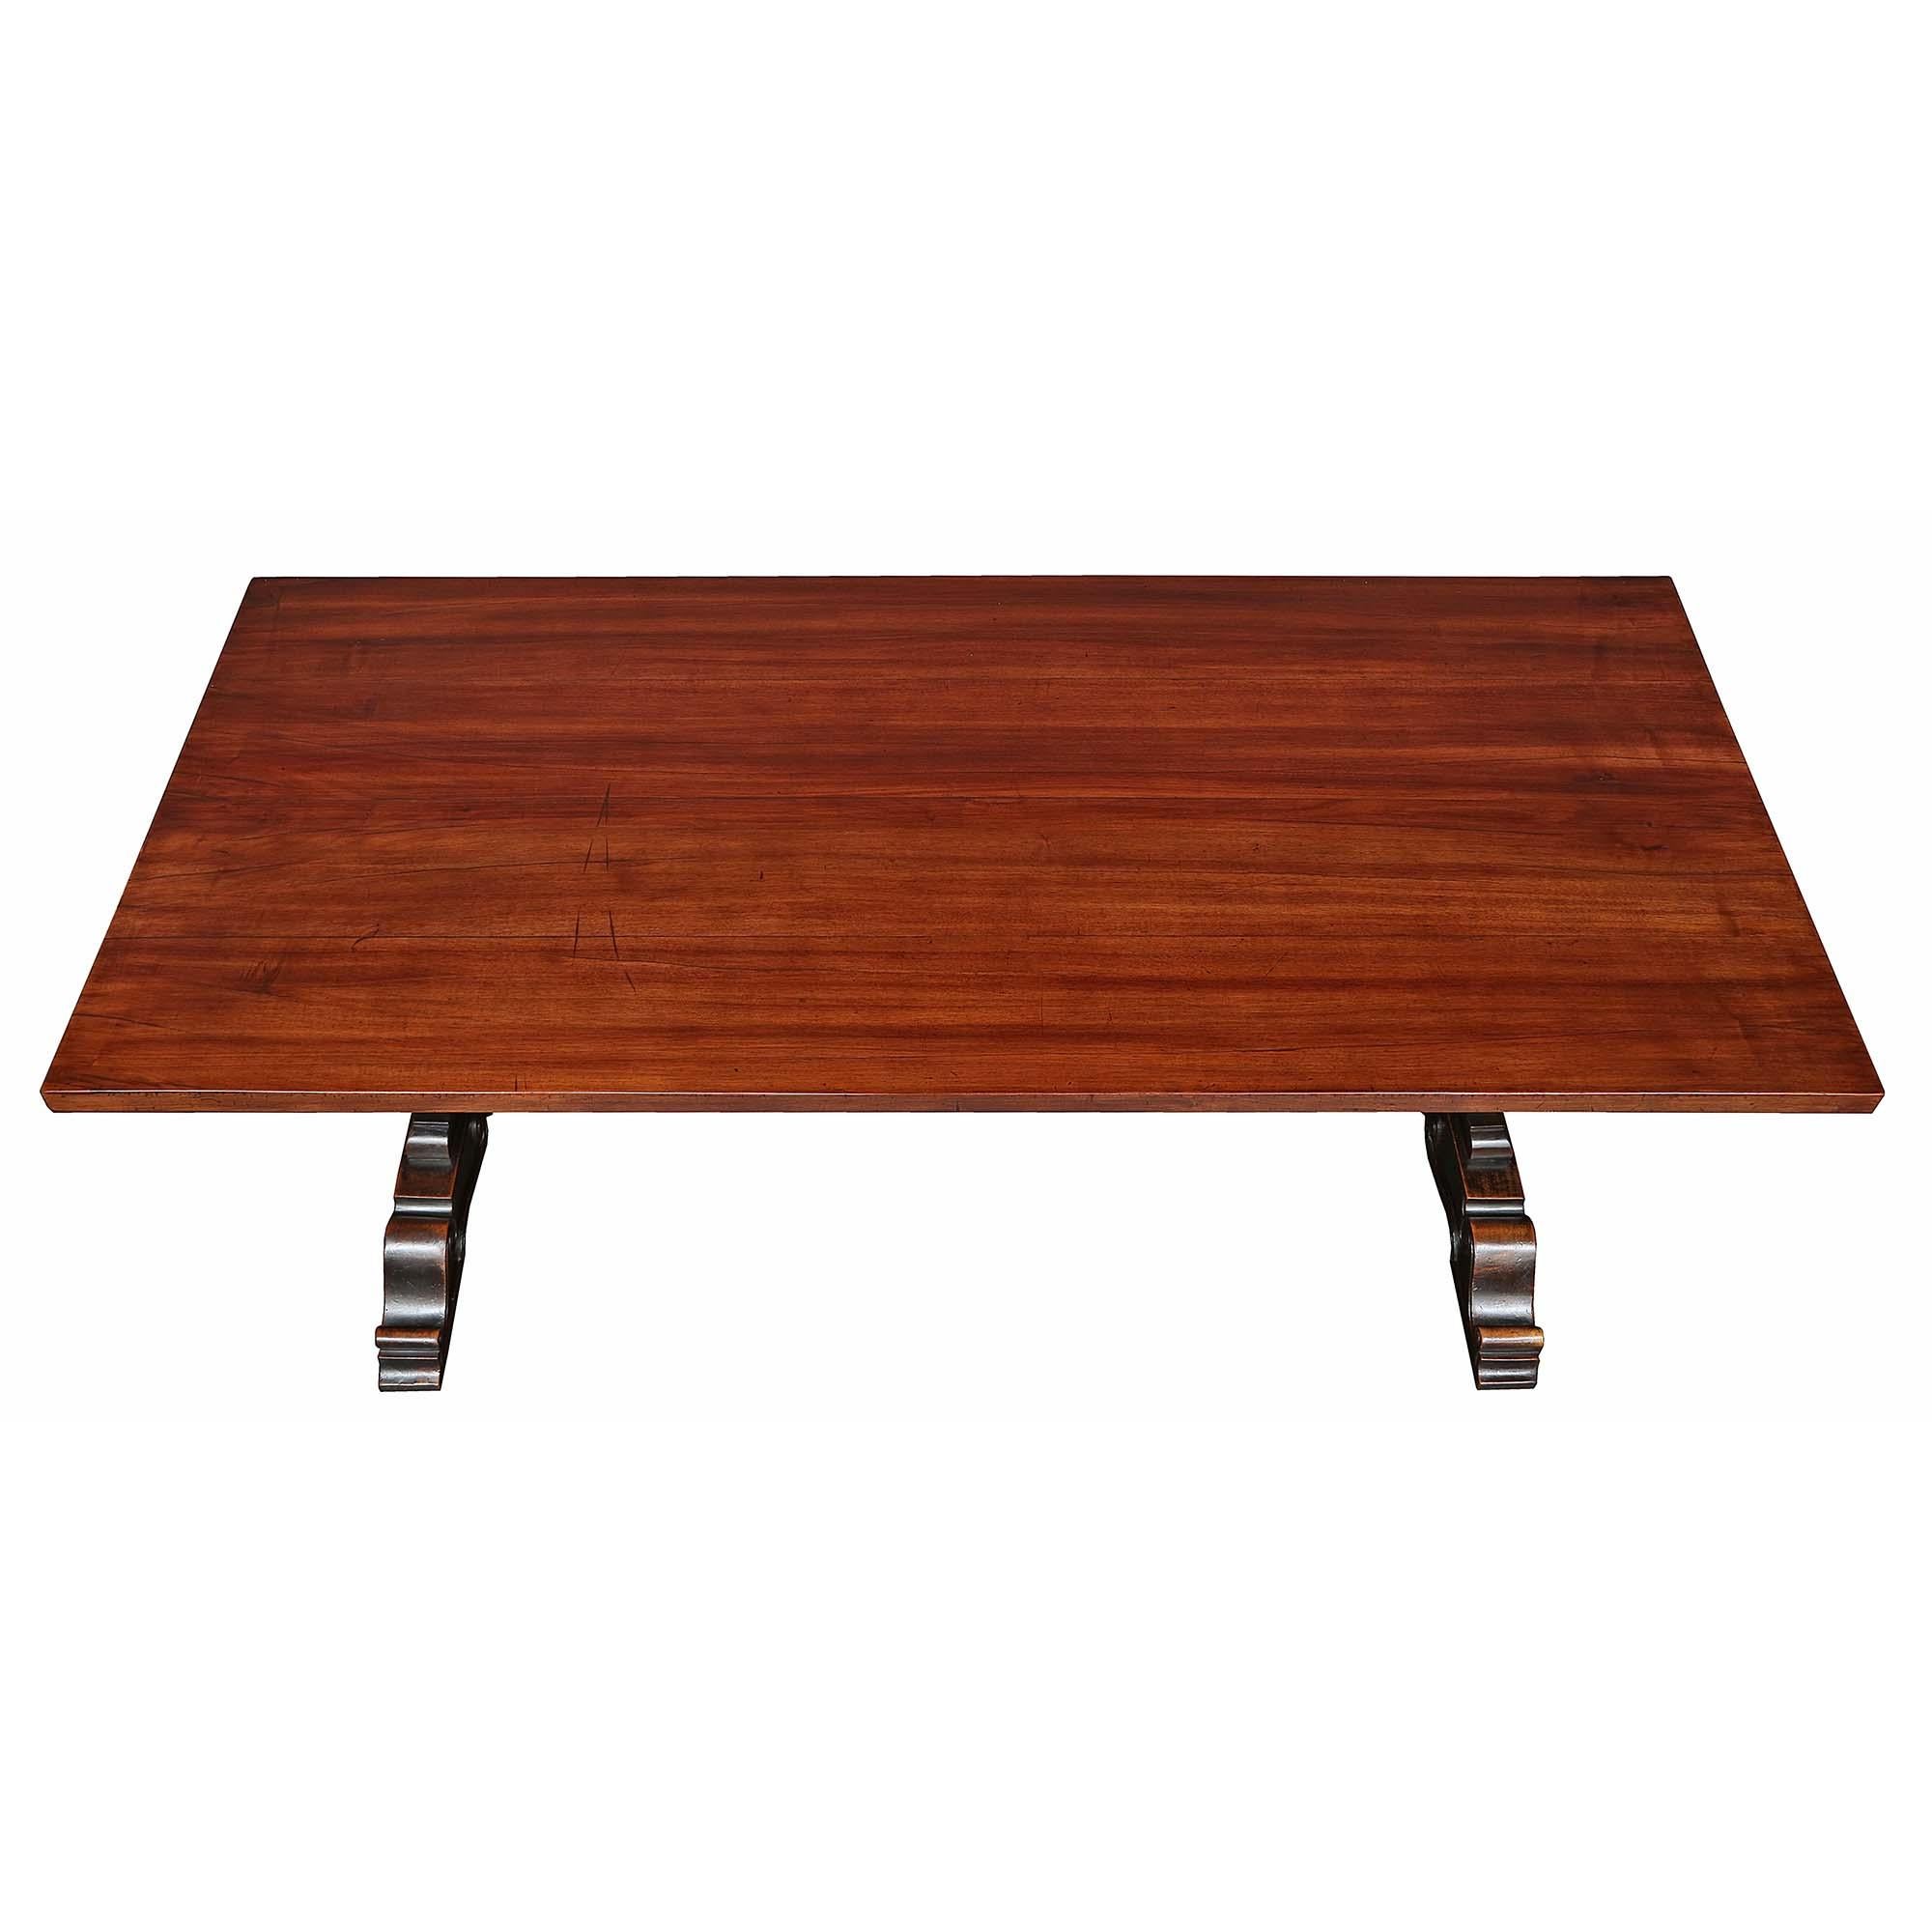 Italian Mid-19th Century Solid Walnut Trestle Table In Good Condition For Sale In West Palm Beach, FL